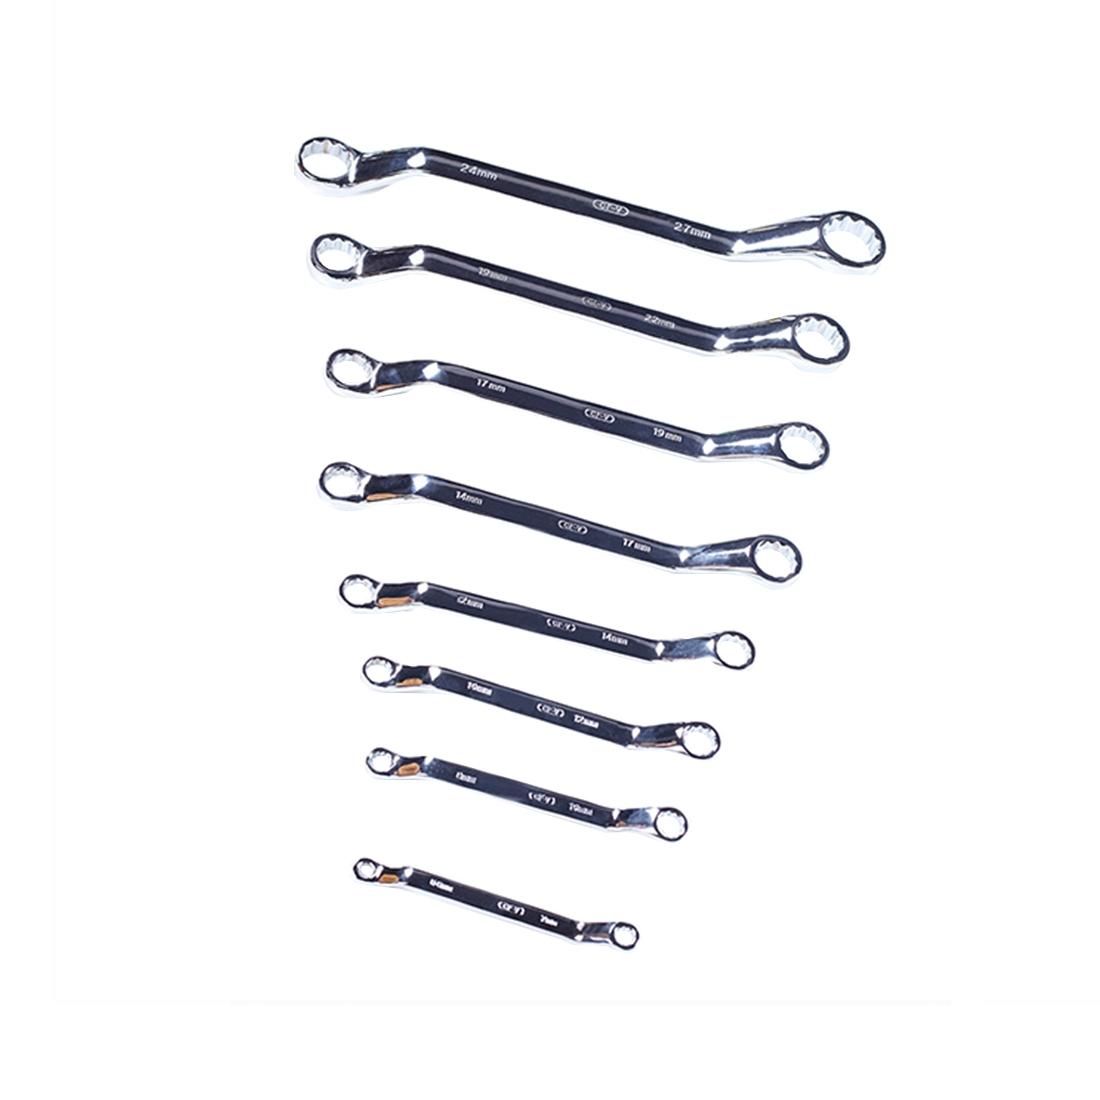 8 PCS Double-end Chrome Plated Carbon Steel Ratchet Wrench Spanner Set